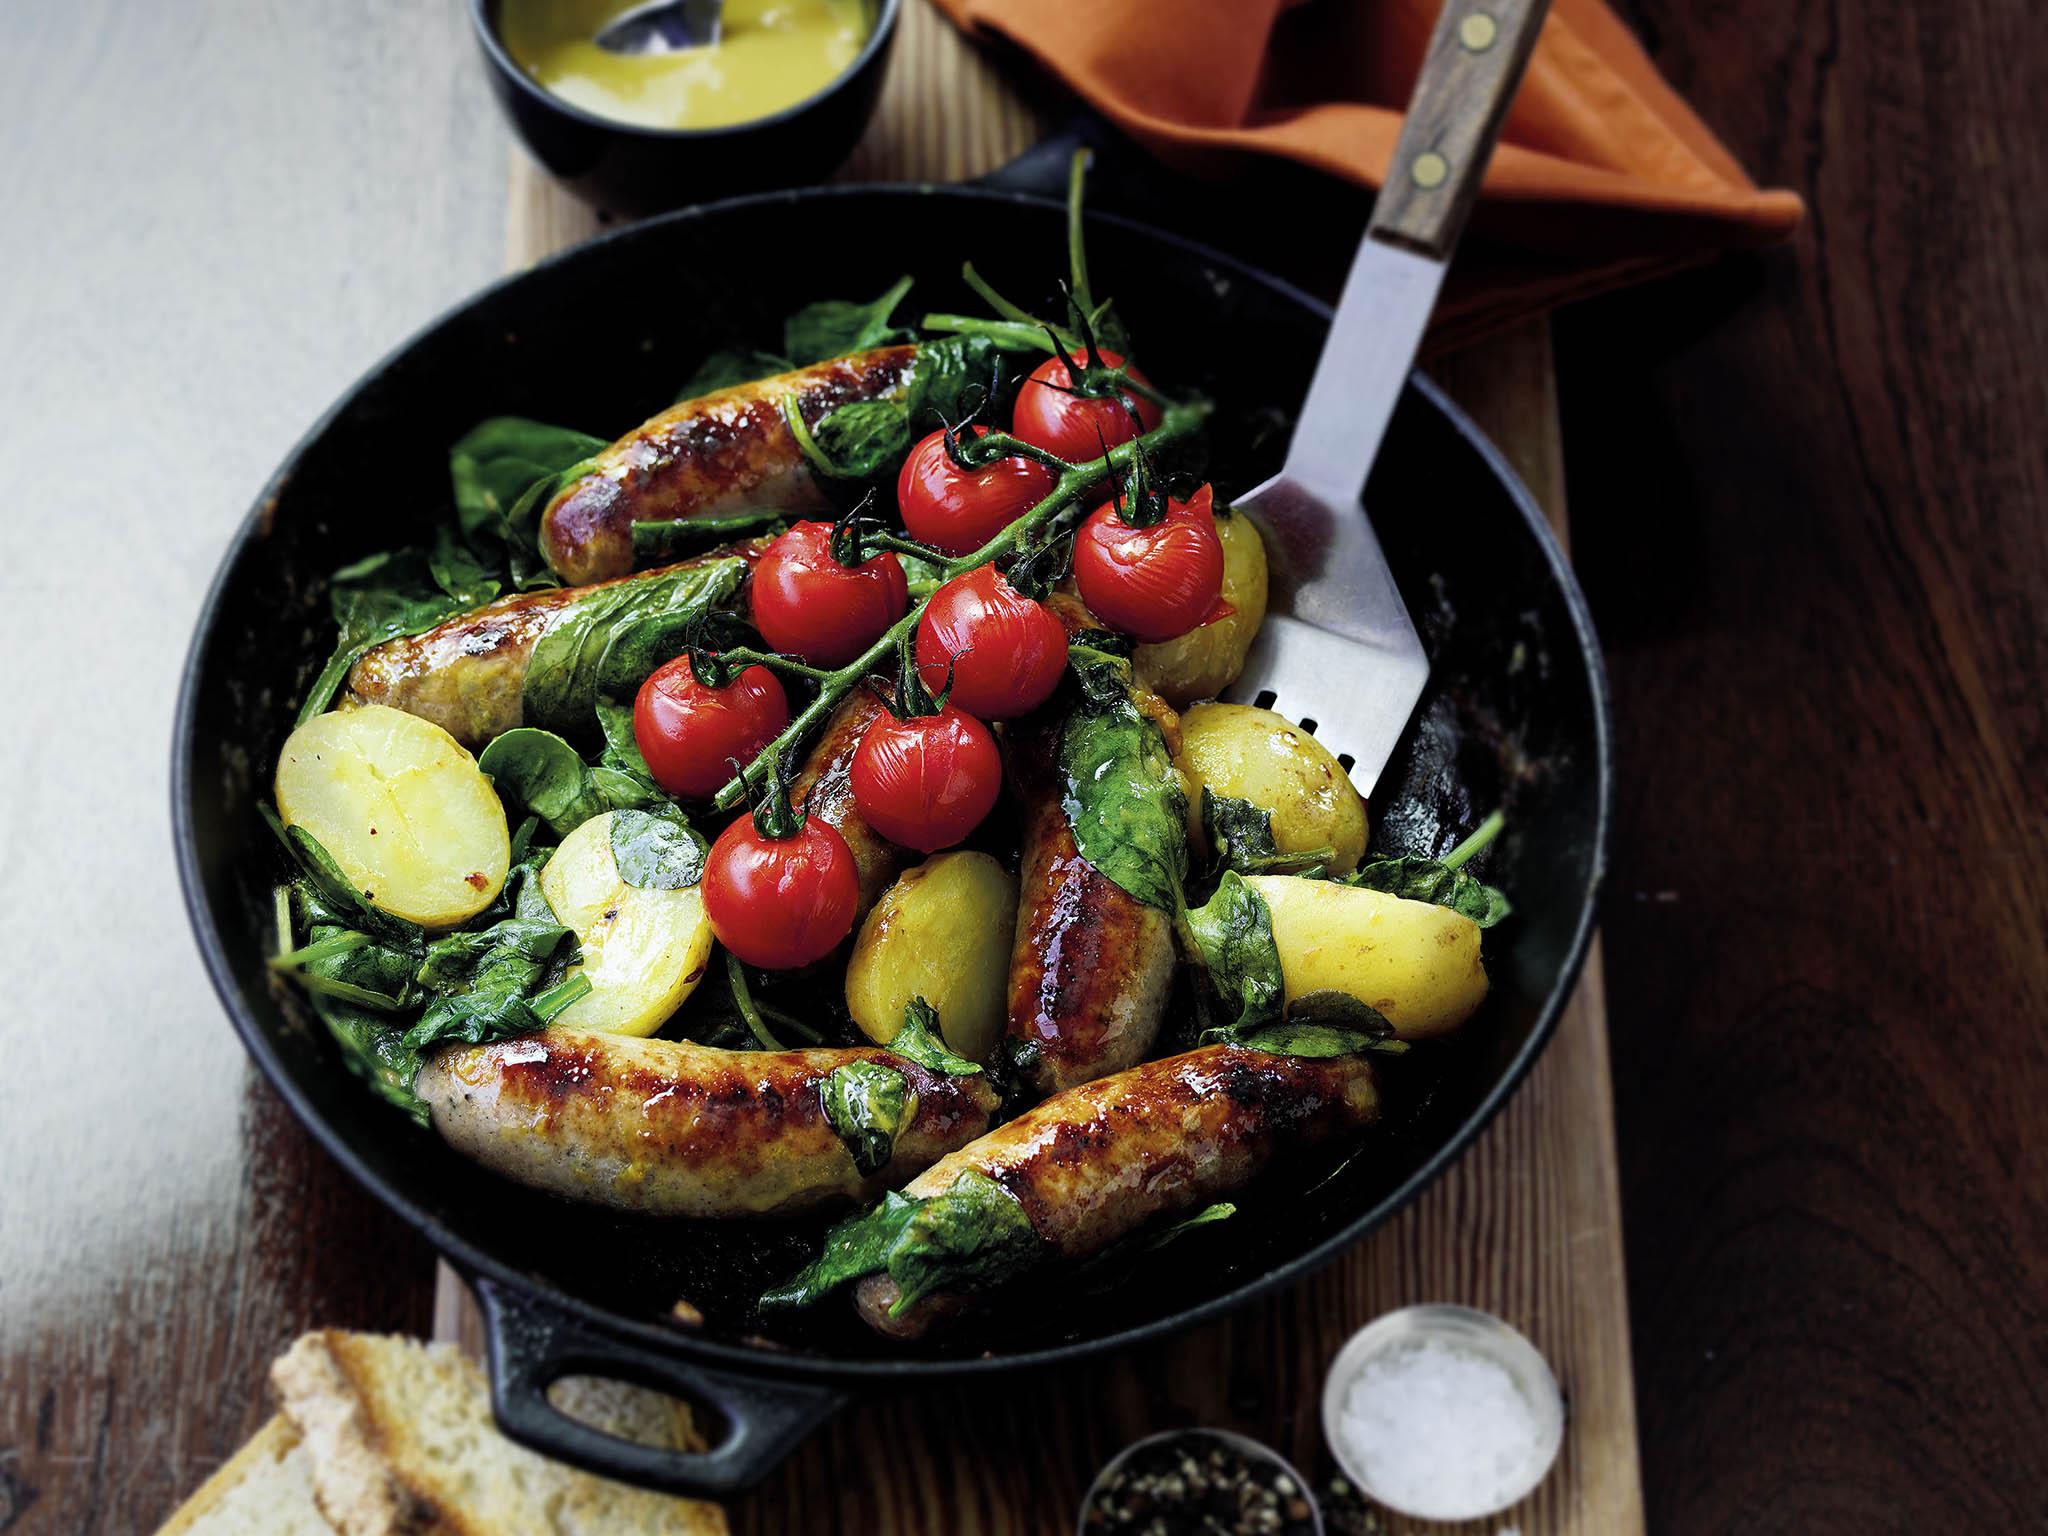 This sausage-based dish can be cooked in a single pan